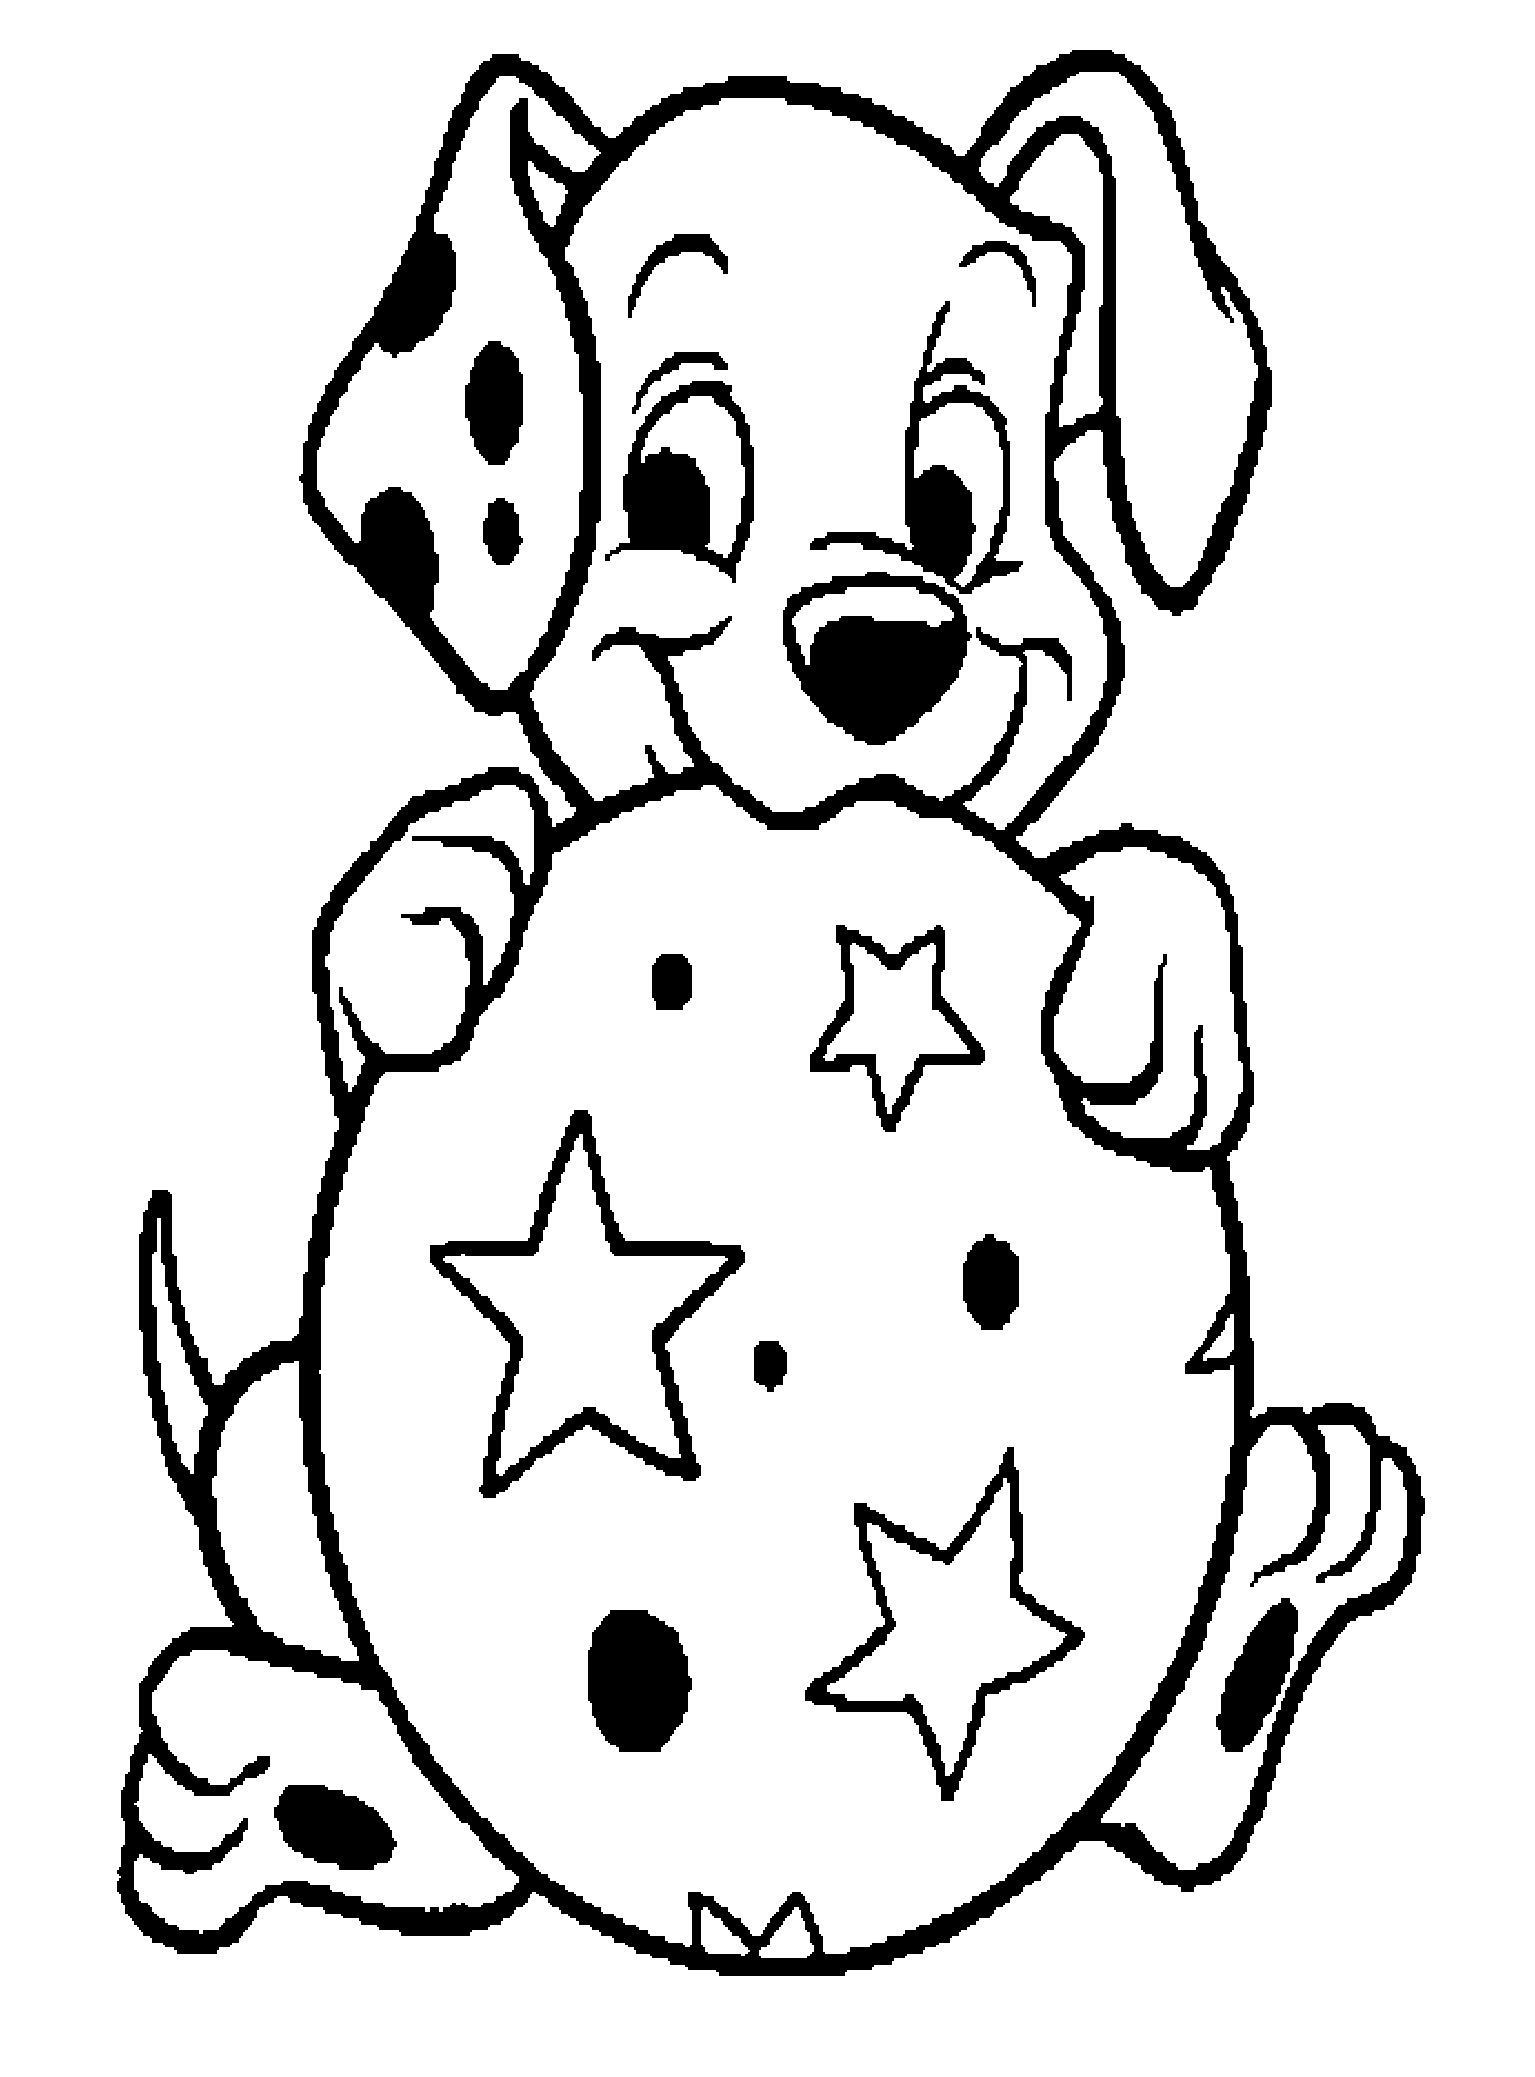 Printable 101 Dalmatians coloring page to print and color for free